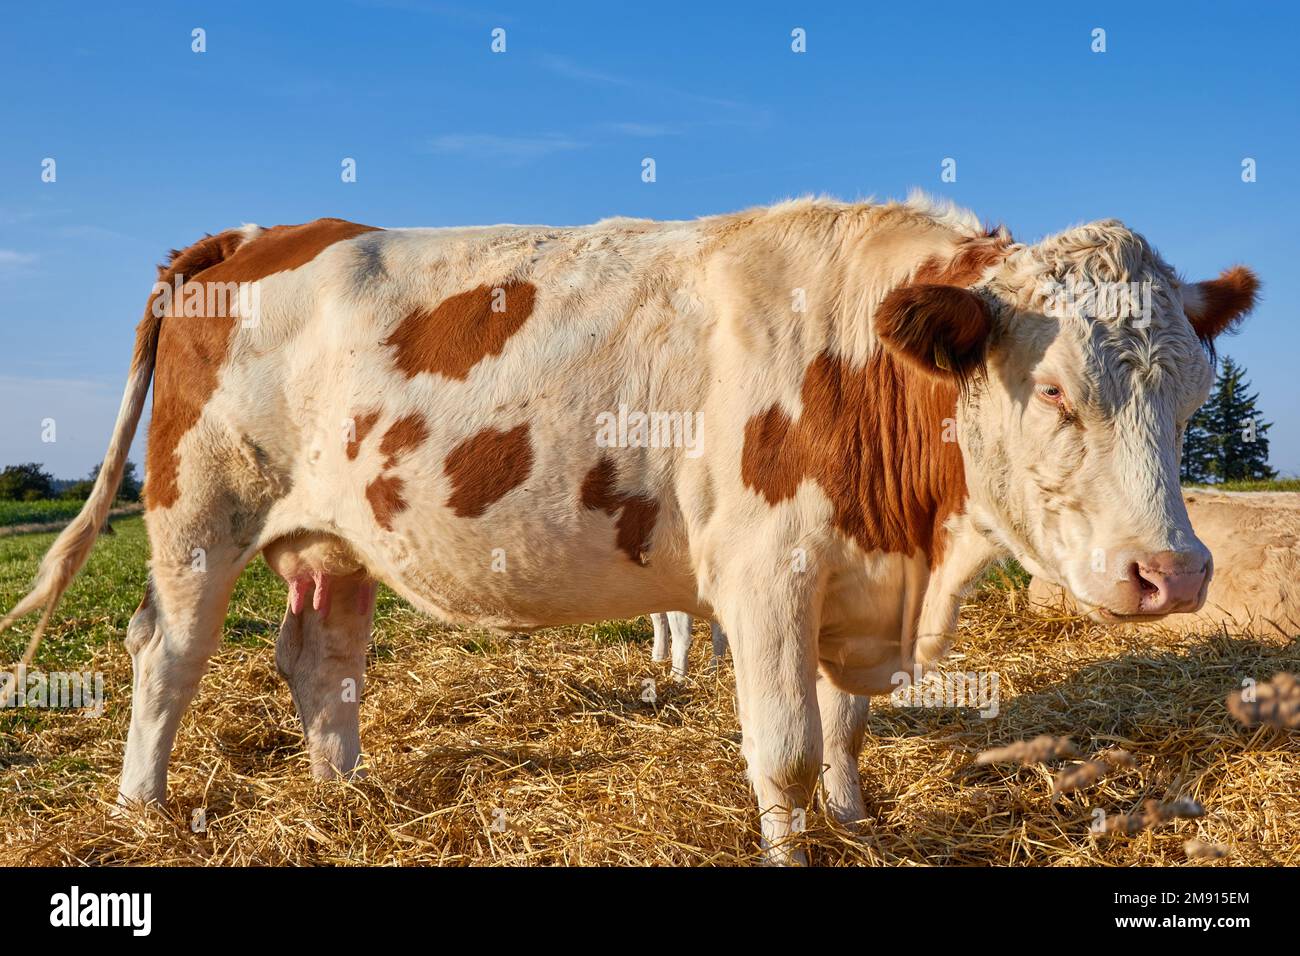 Cow, white and brown; Fur, Denmark Stock Photo